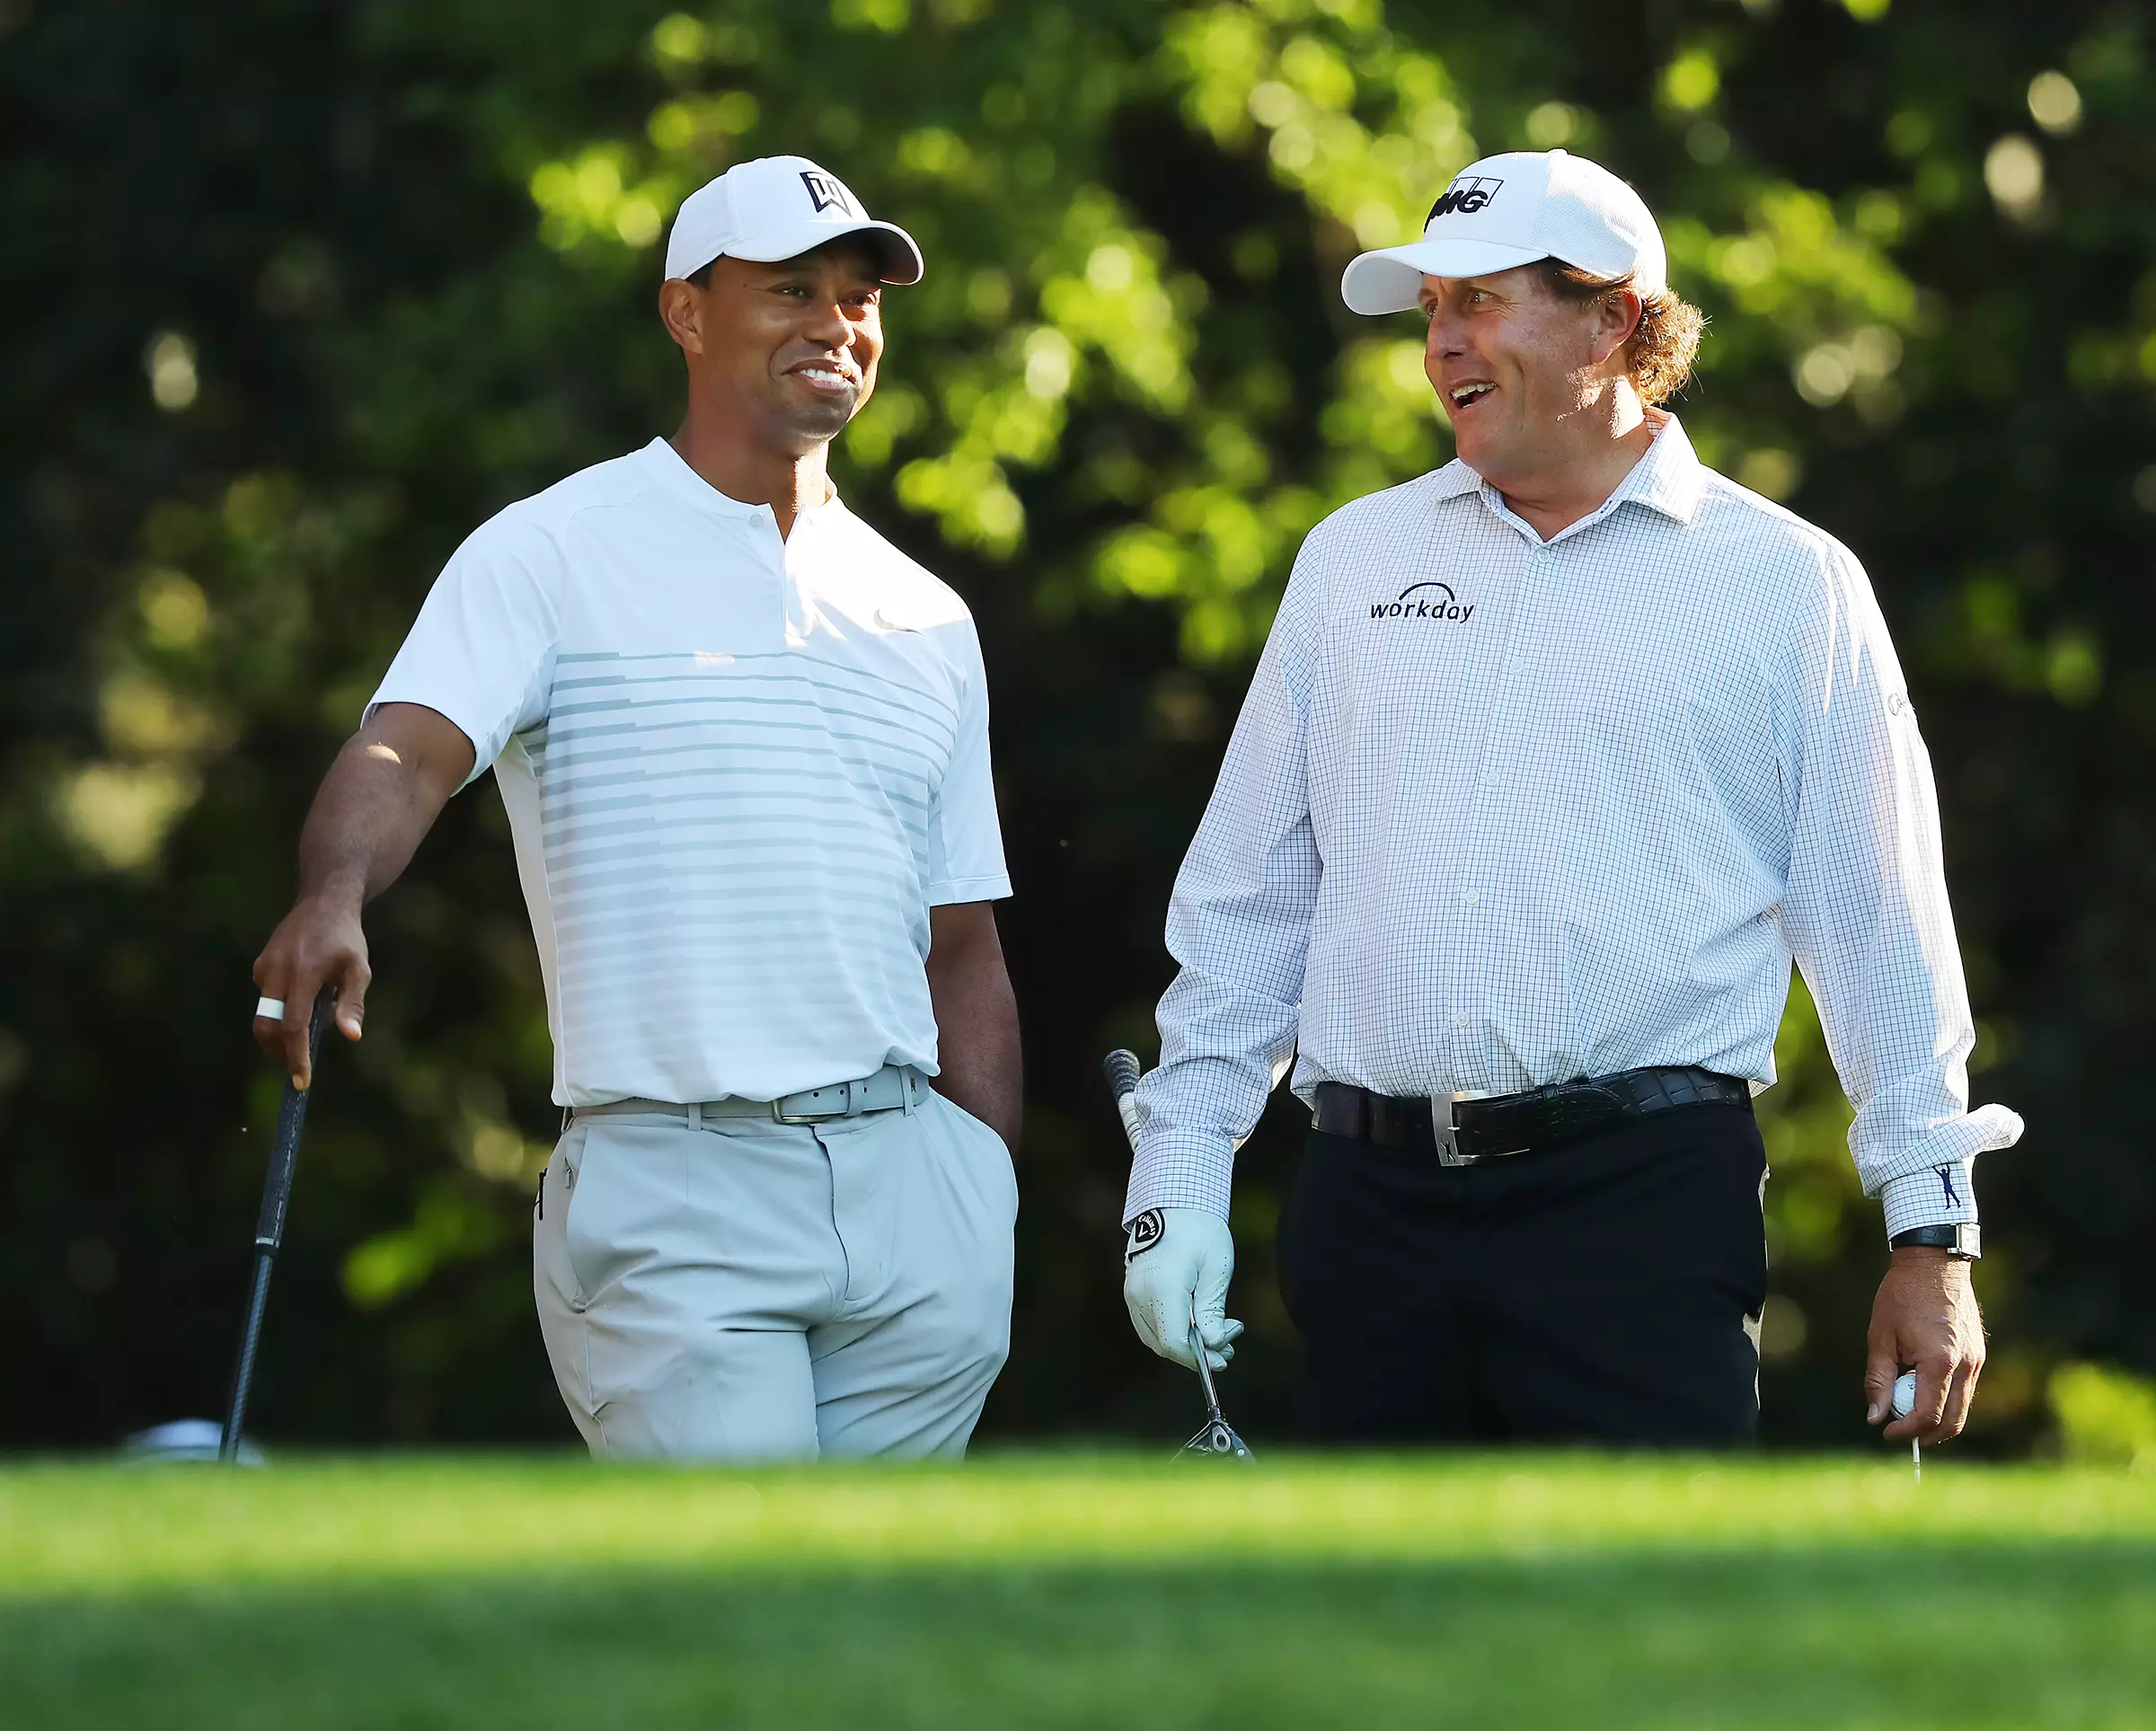 Woods and Mickelson during a practice round at Augusta earlier this year. Image: PA Images